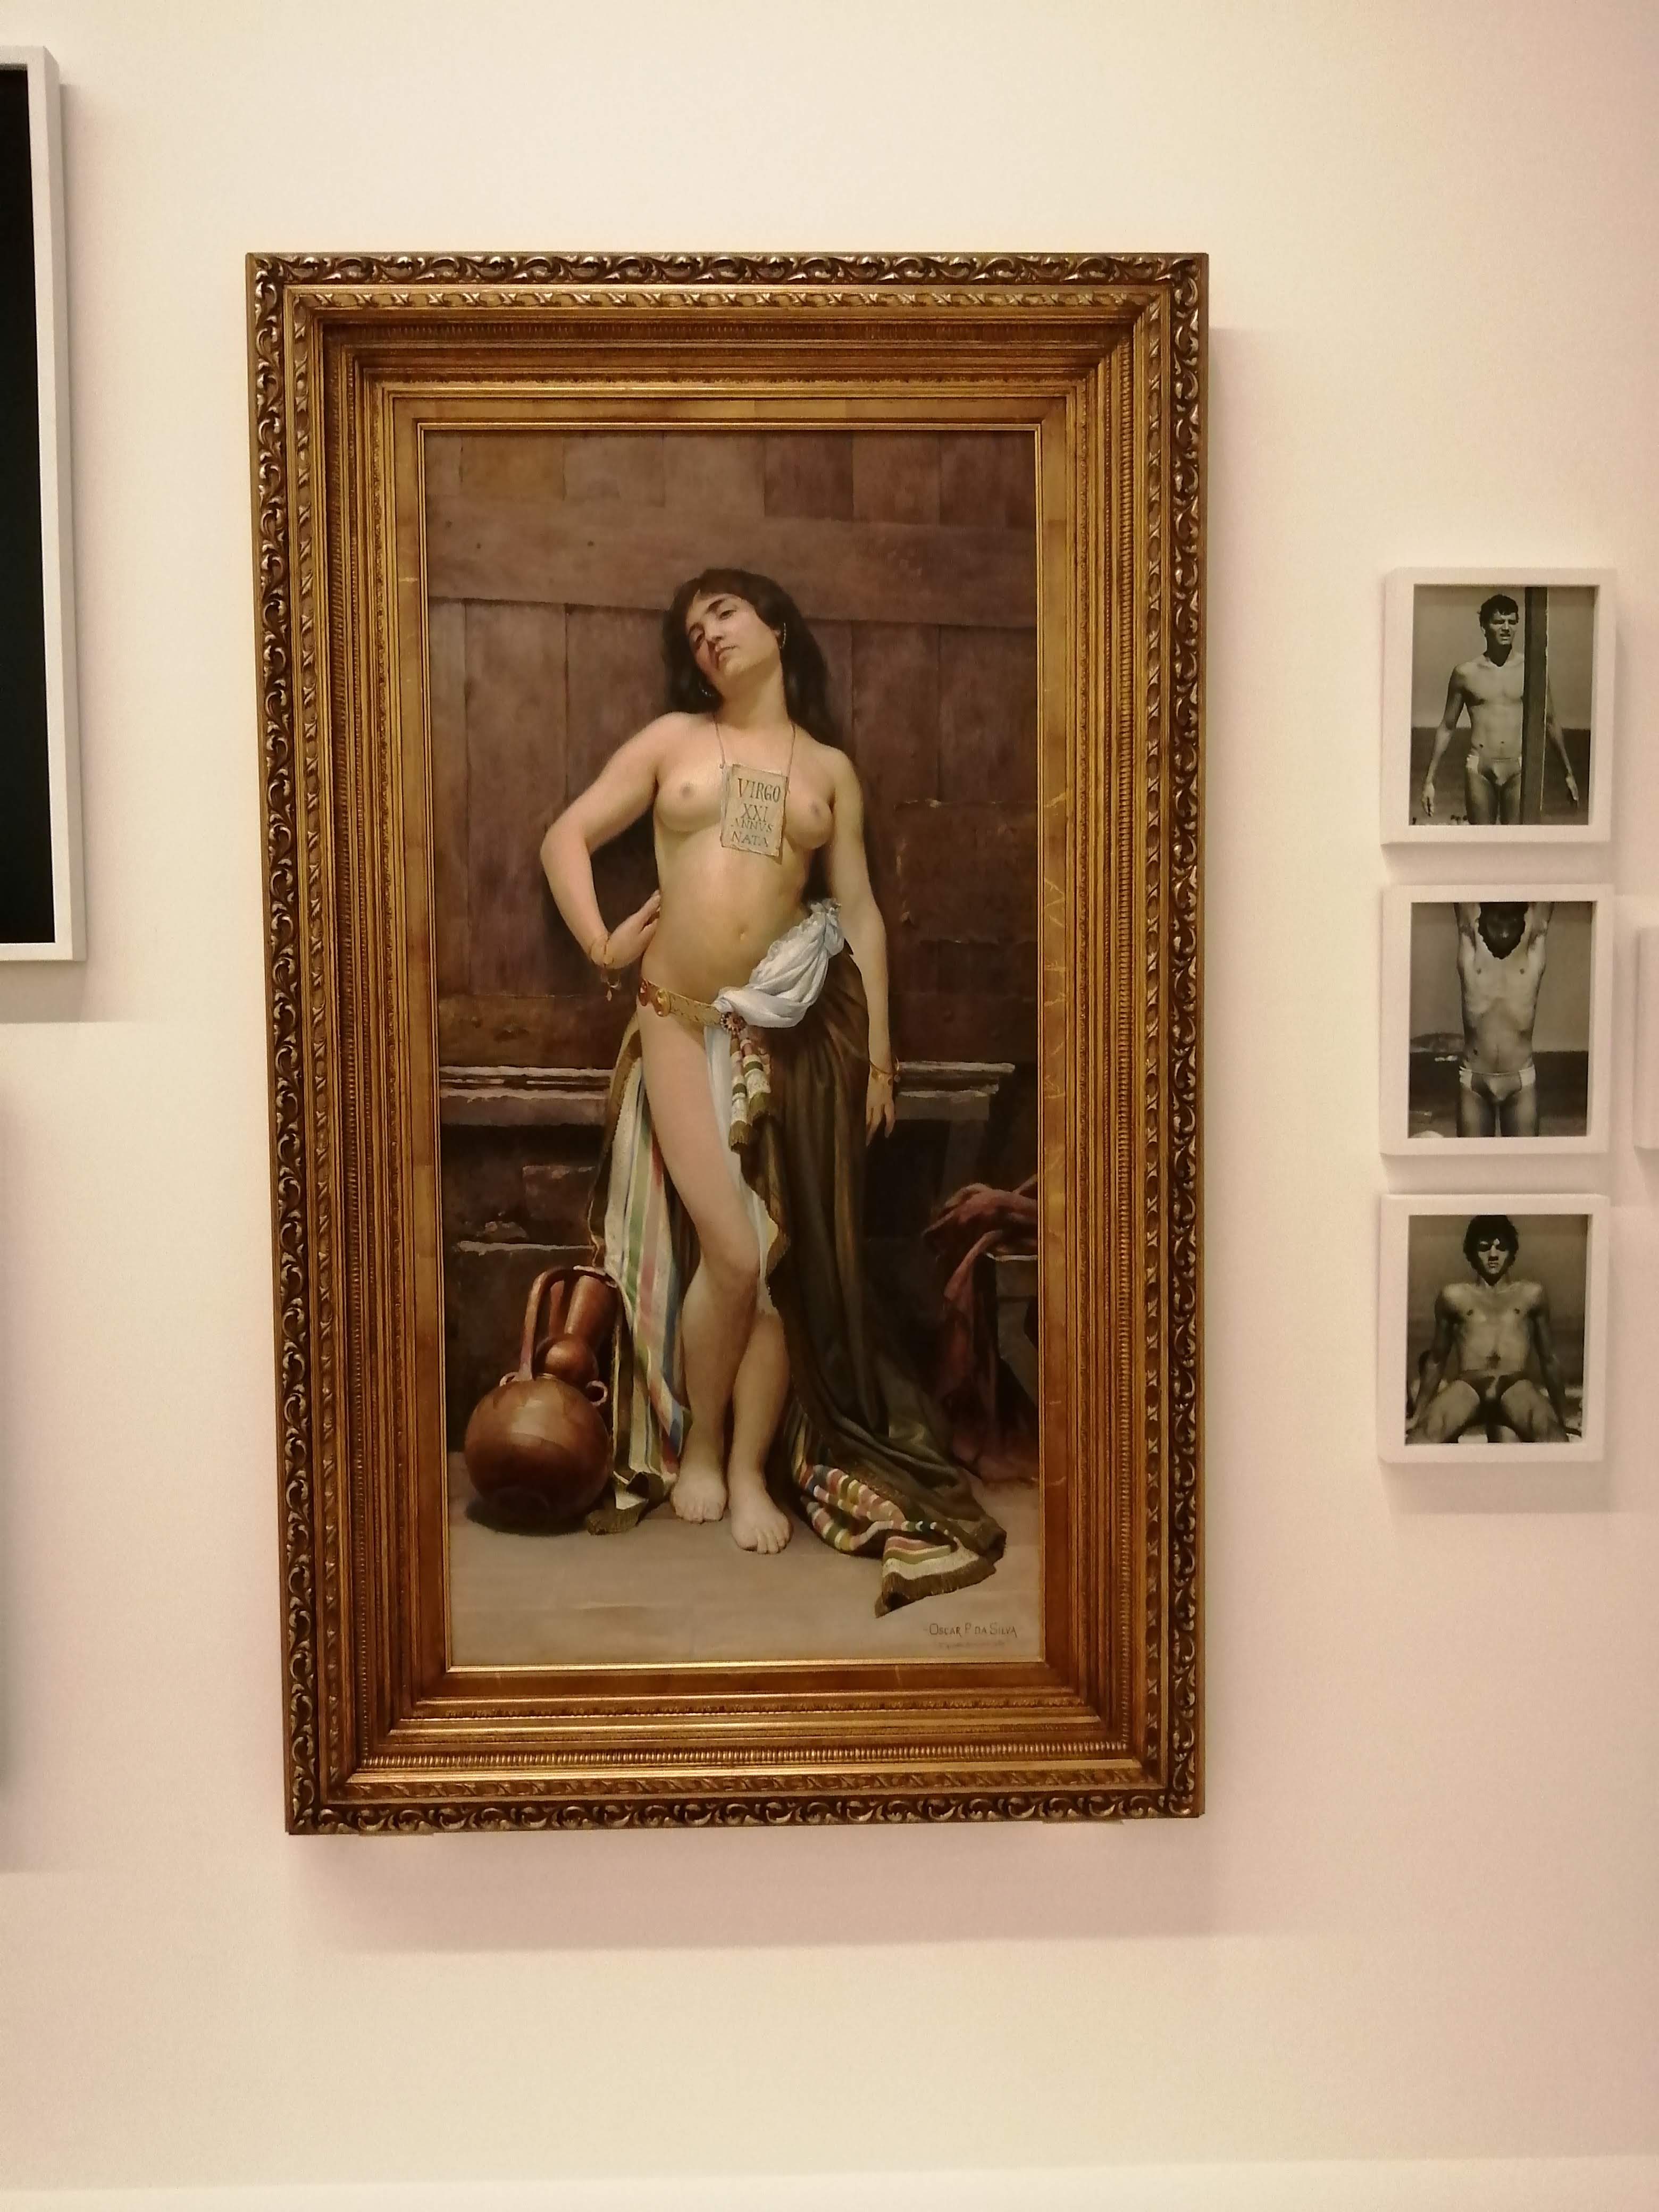 Discover the alluring charm of La Ricca Pinacoteca Milanese's adult art collection